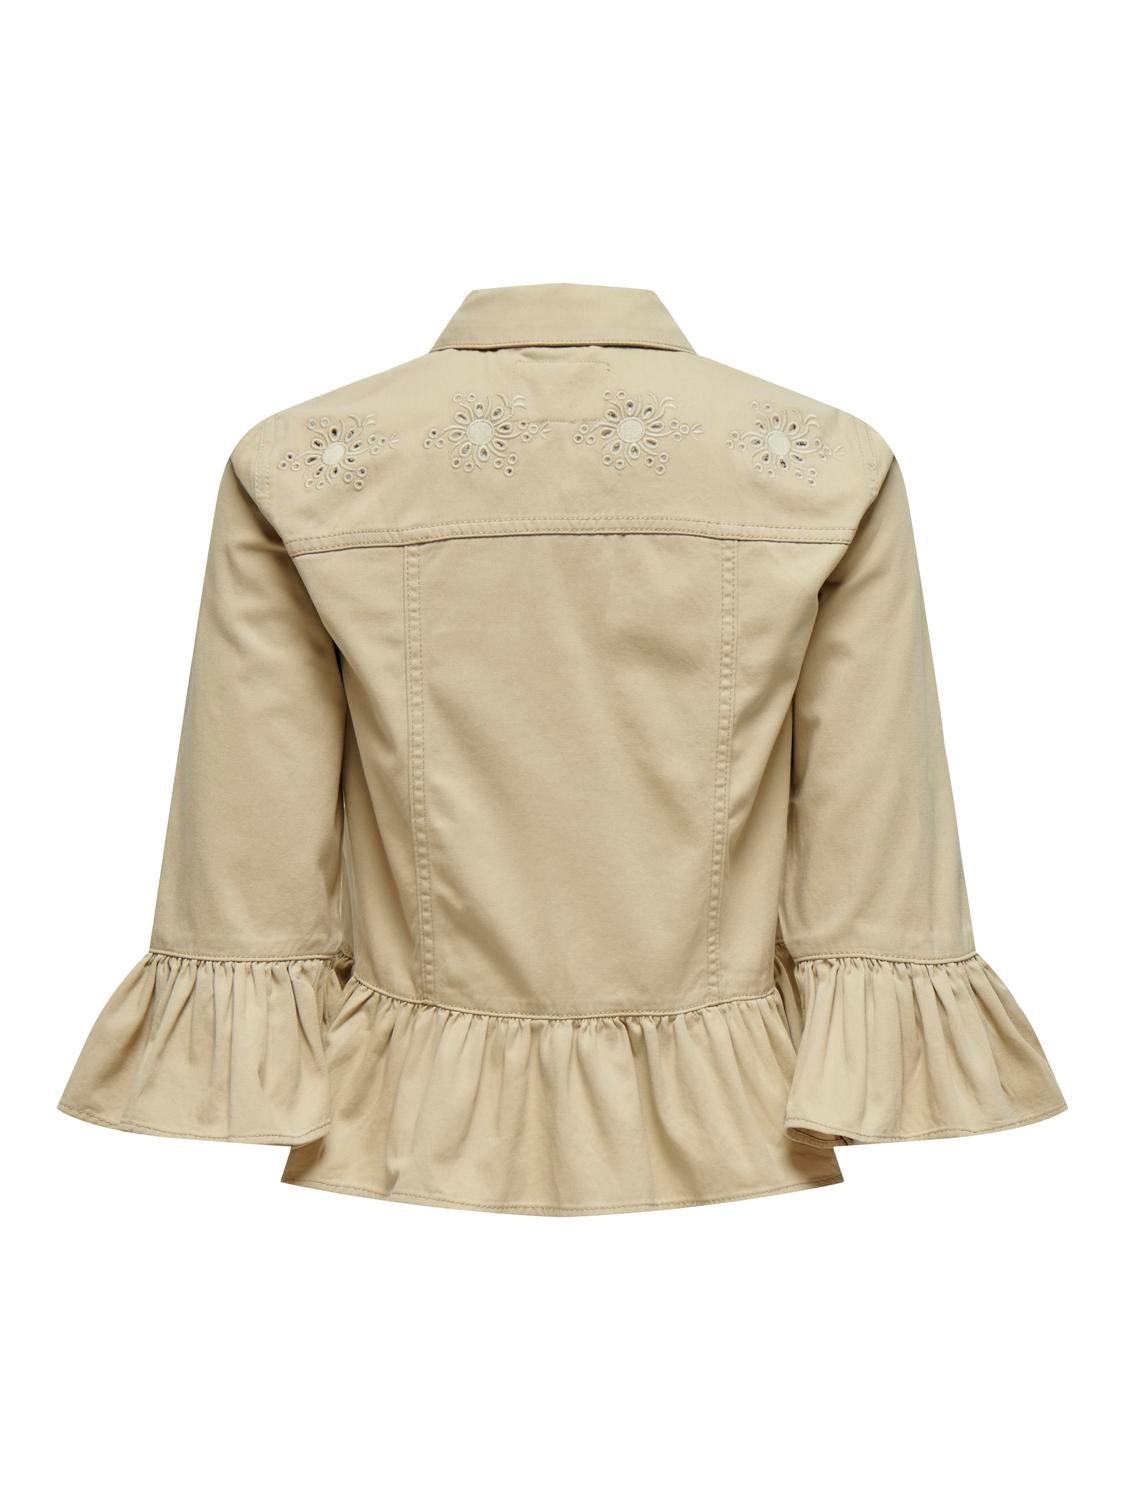 ONLY Jacket with frills -Pale Khaki - 15314650